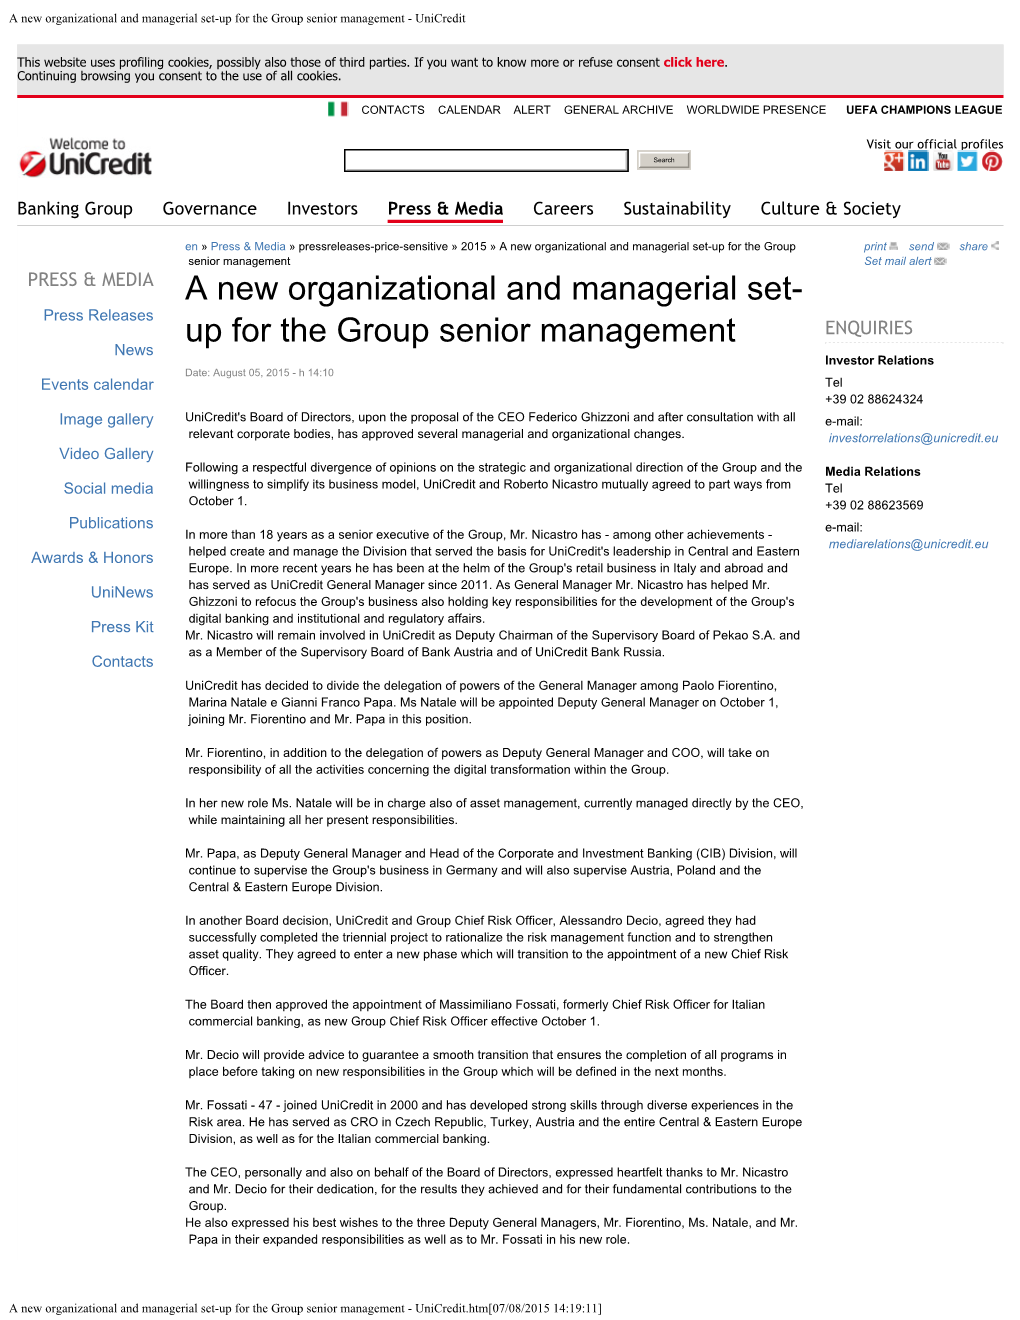 A New Organizational and Managerial Set- up for the Group Senior